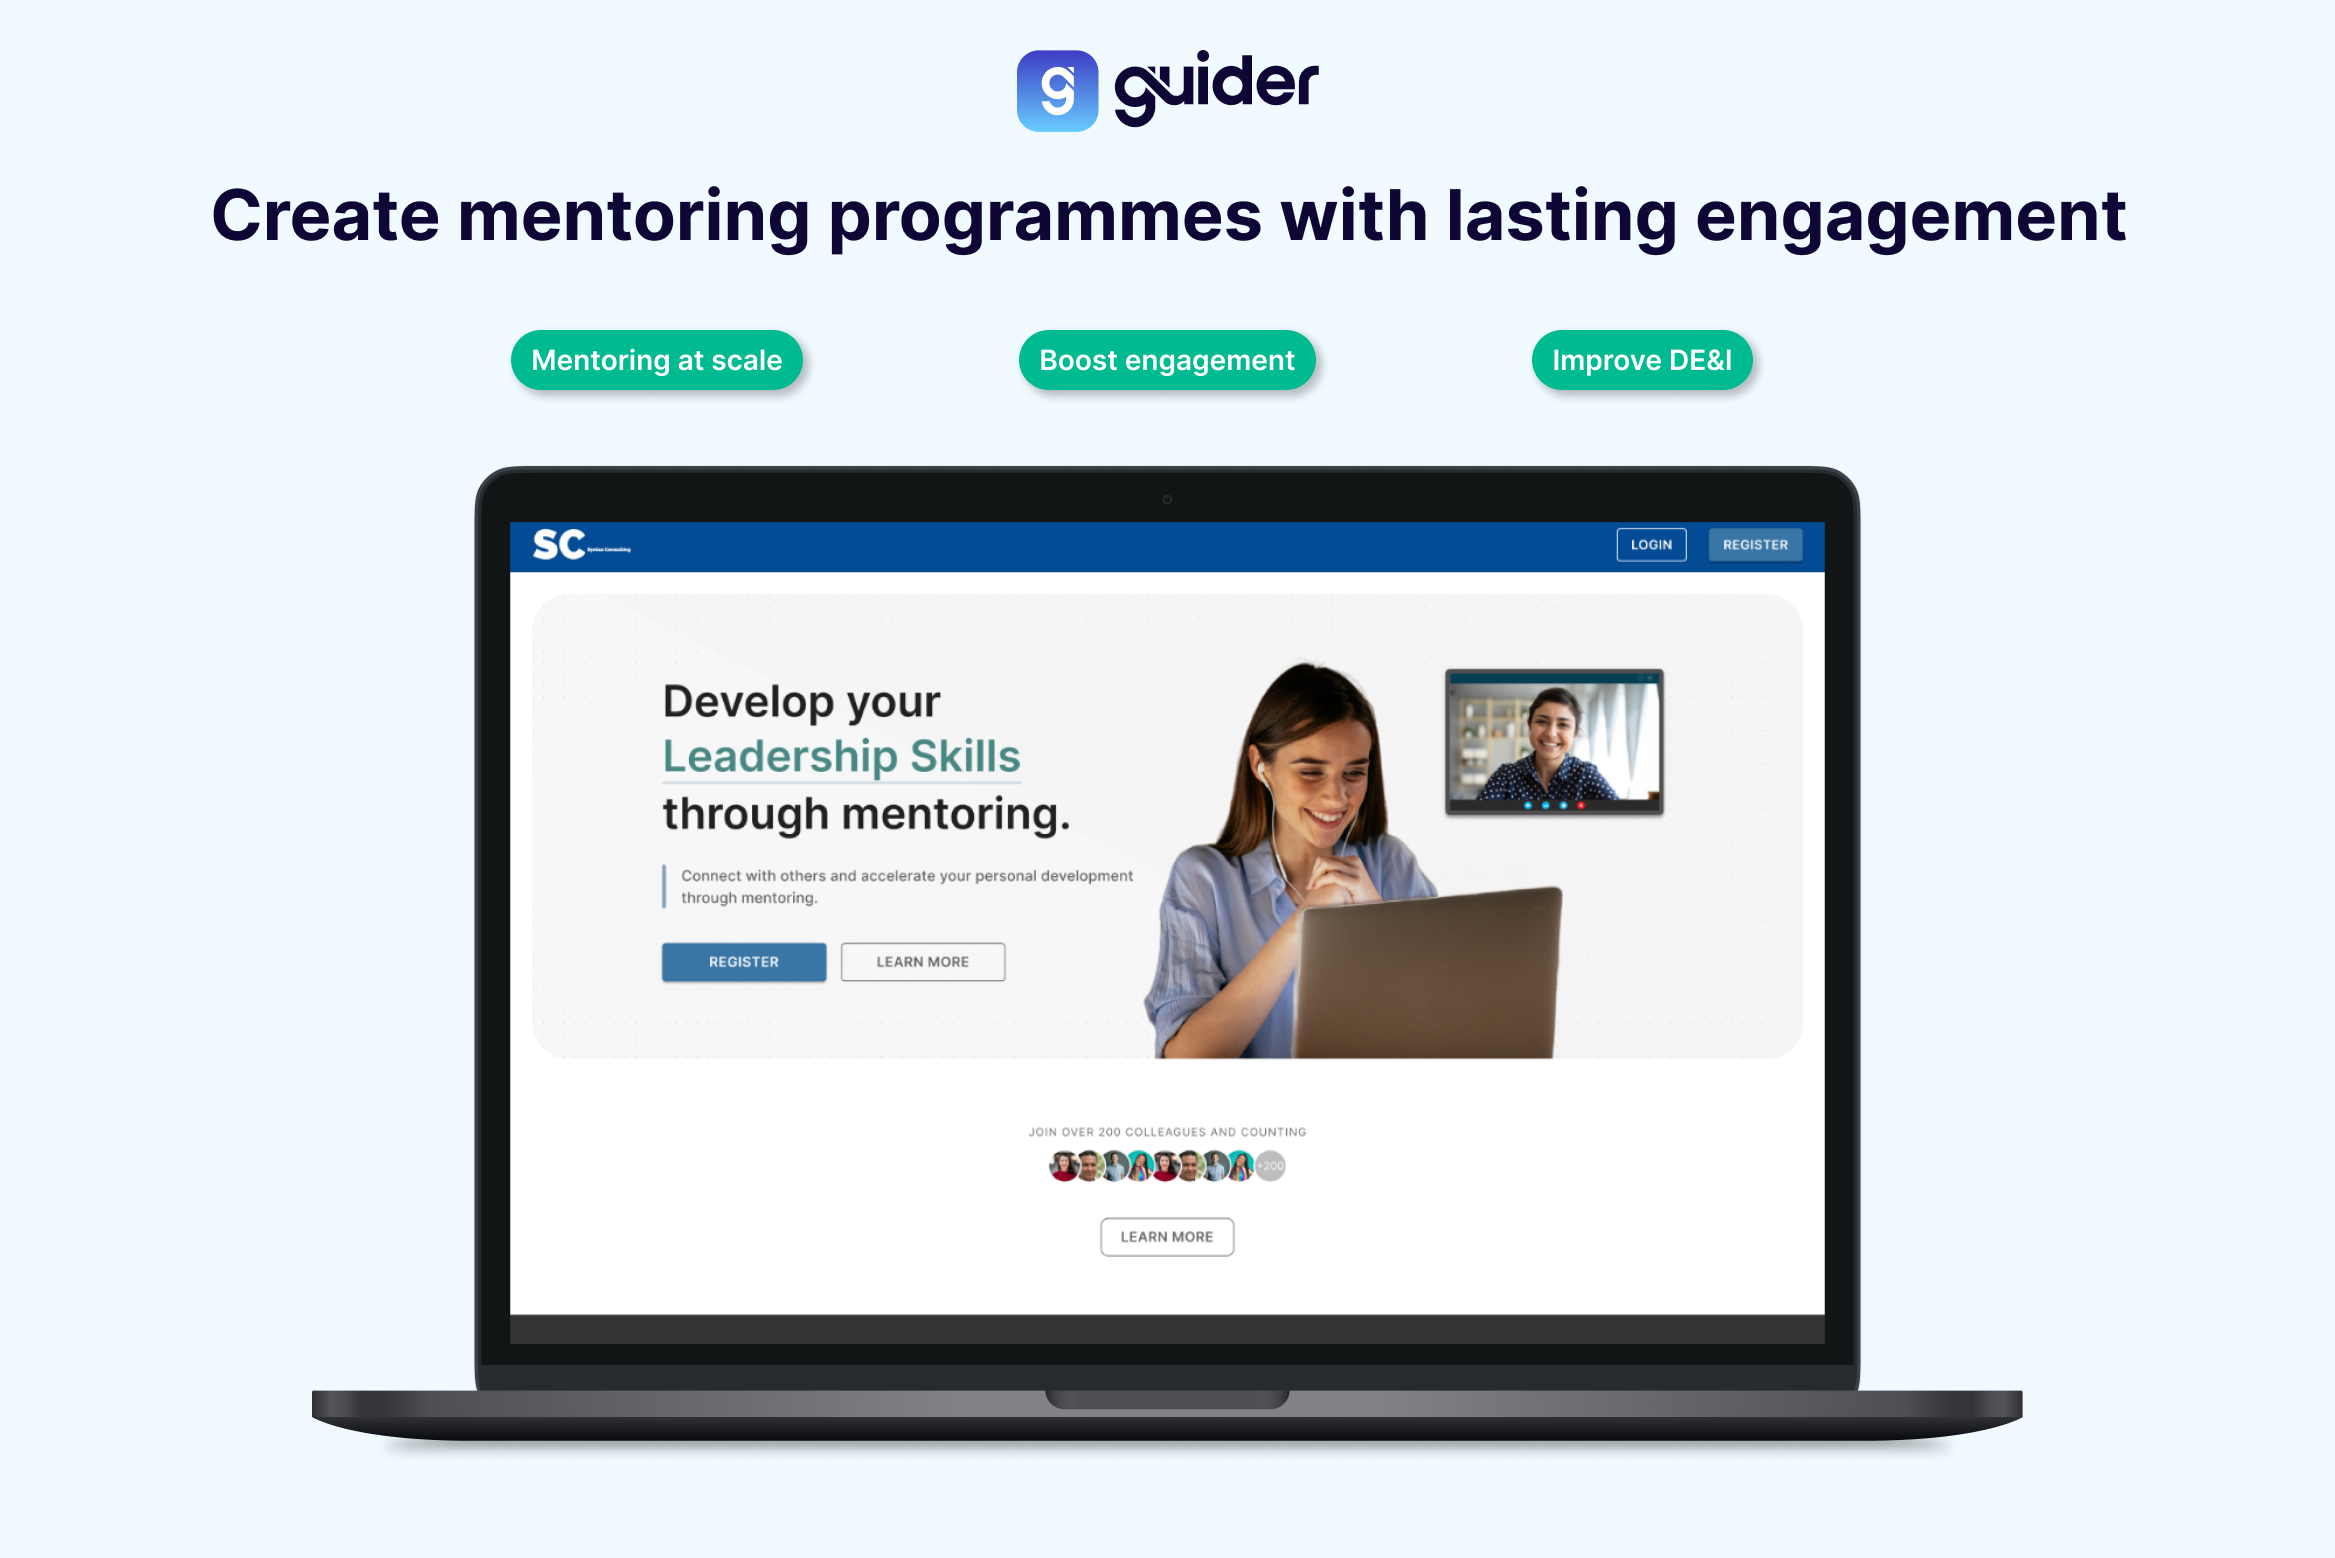 Build learning experiences that have lasting employee engagement with mentoring programmes tailored to your organisational goals, whether you're looking to improve DE&I, nurture graduate talent or develop leadership.